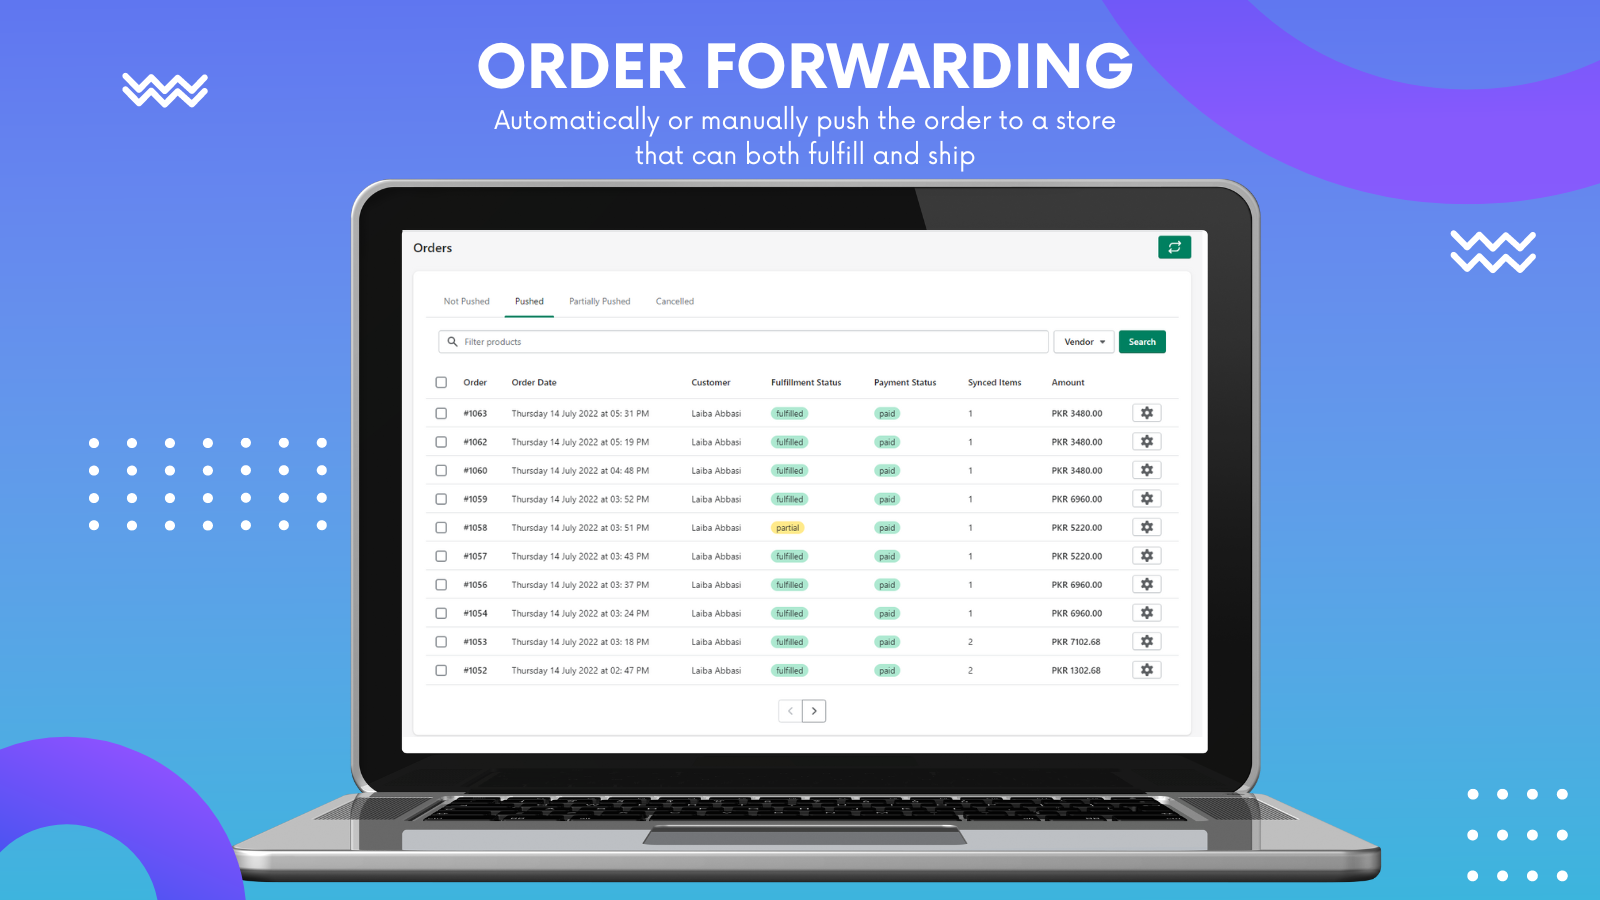 Forward orders to source store for fulfillment